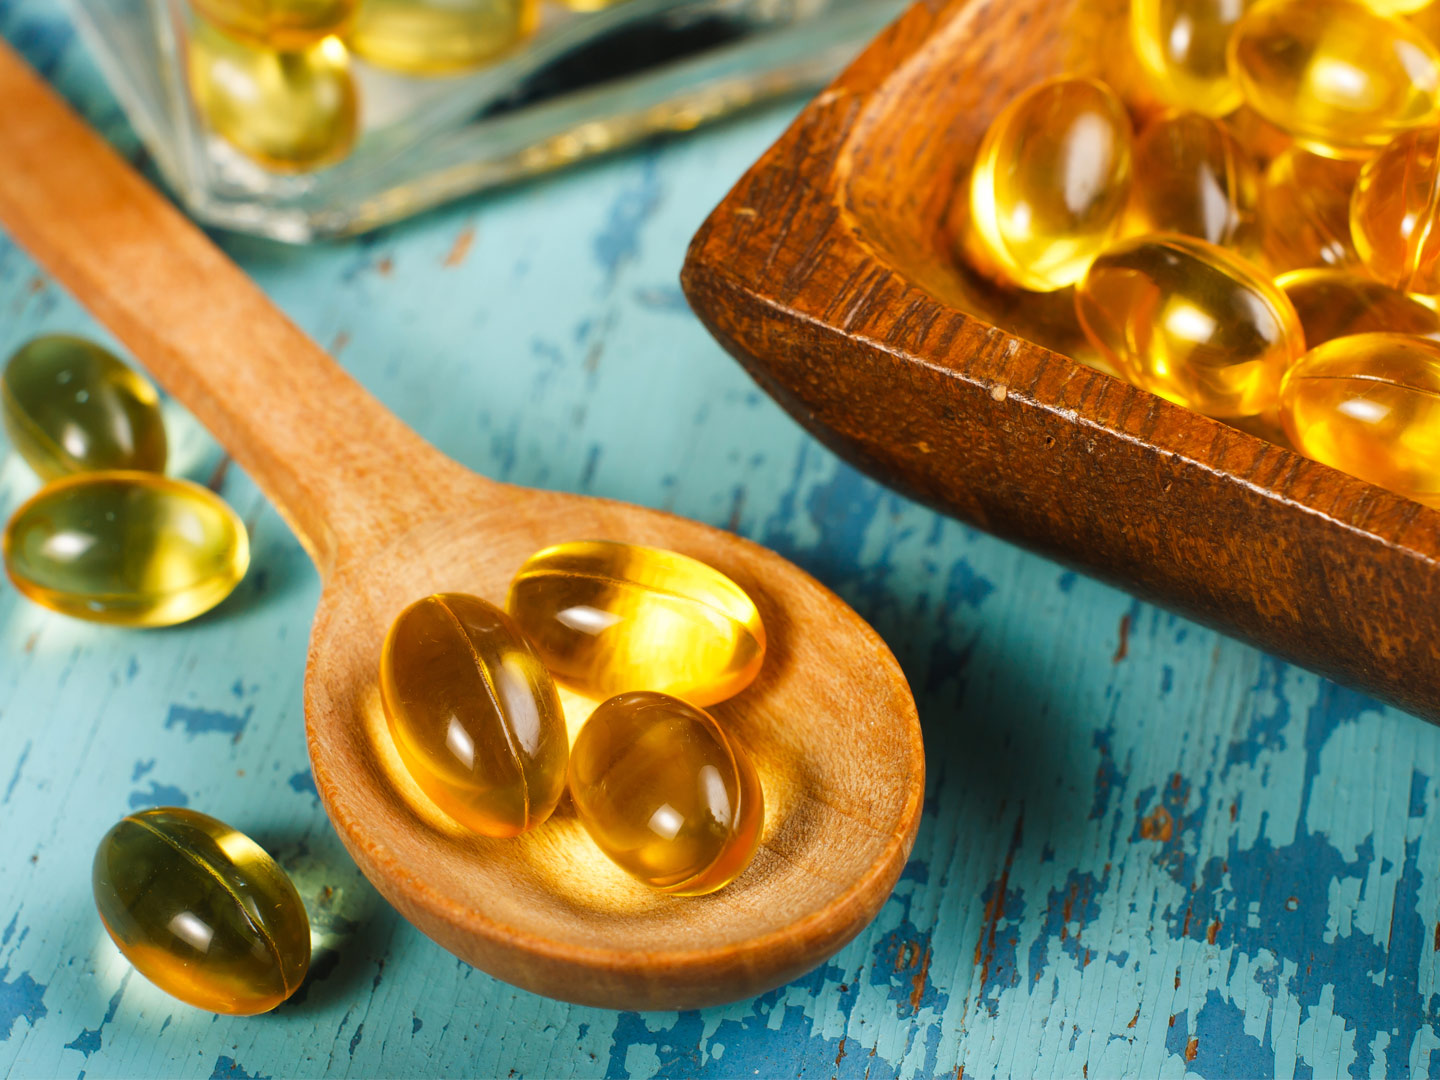 Does Fish Oil Help With Heartburn? | Andrew Weil, M.D.